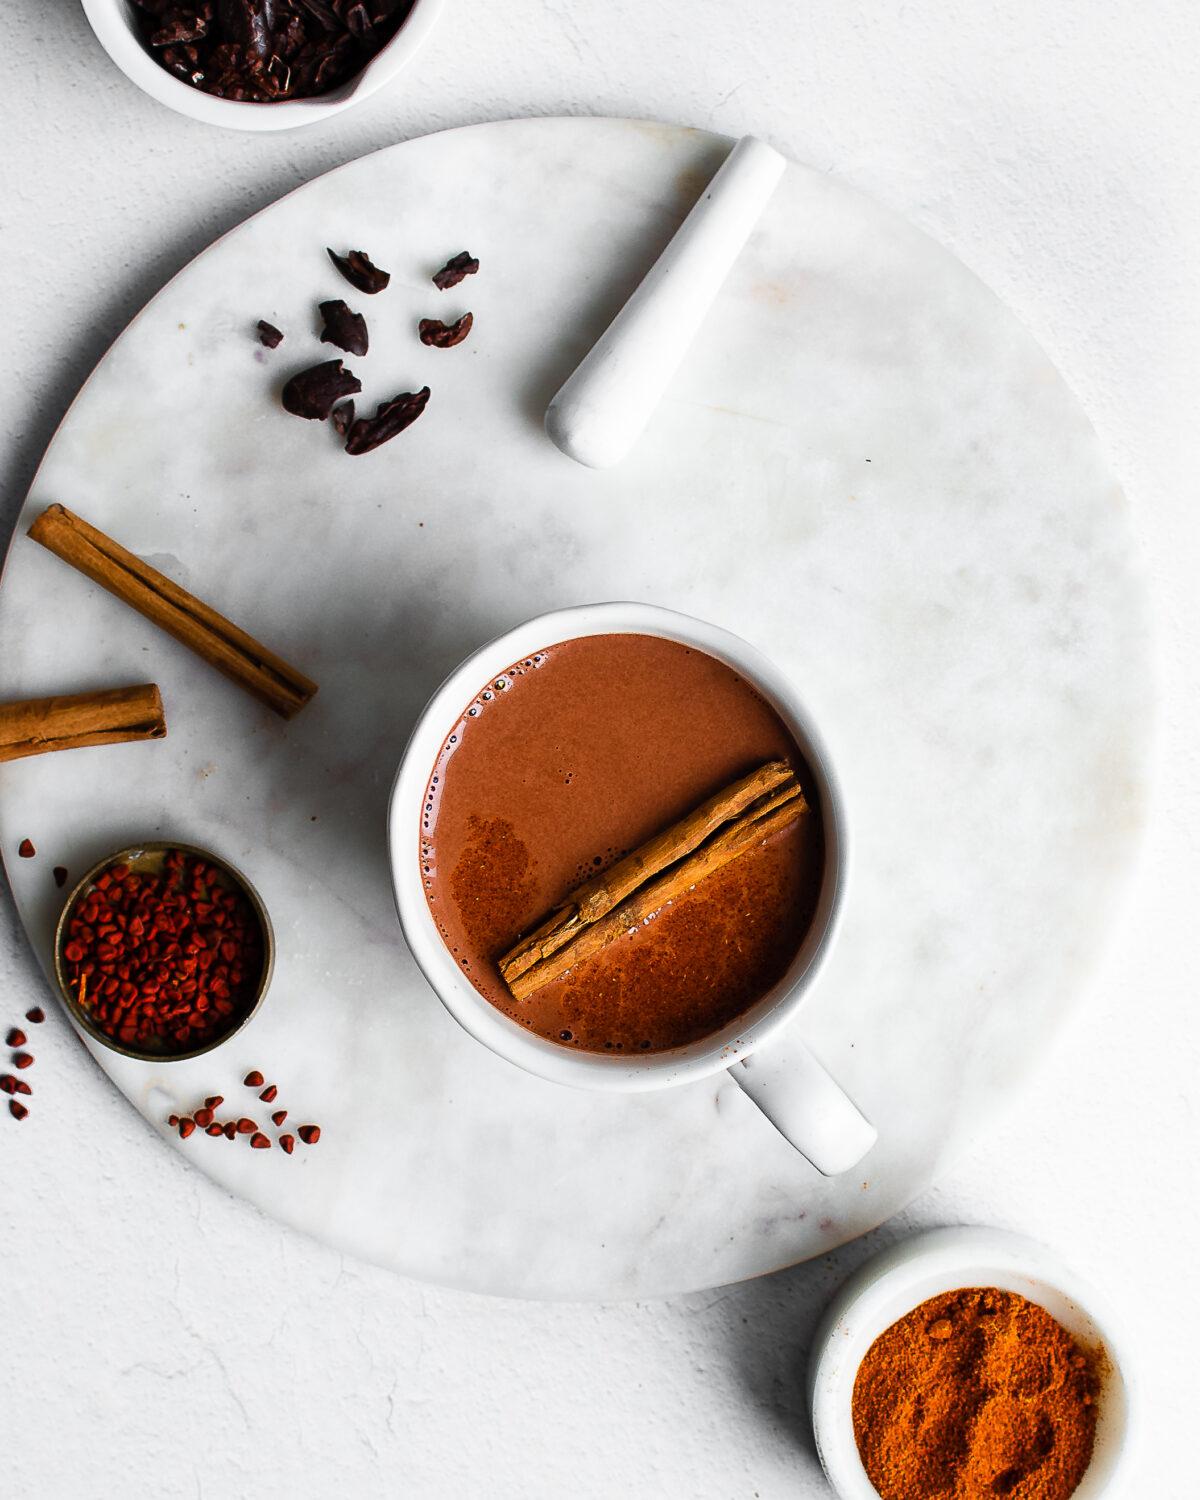 Cinnamon, allspice, chile powder, and earthy-sweet annatto flavor this Mayan-inspired hot chocolate. (Jennifer McGruther)